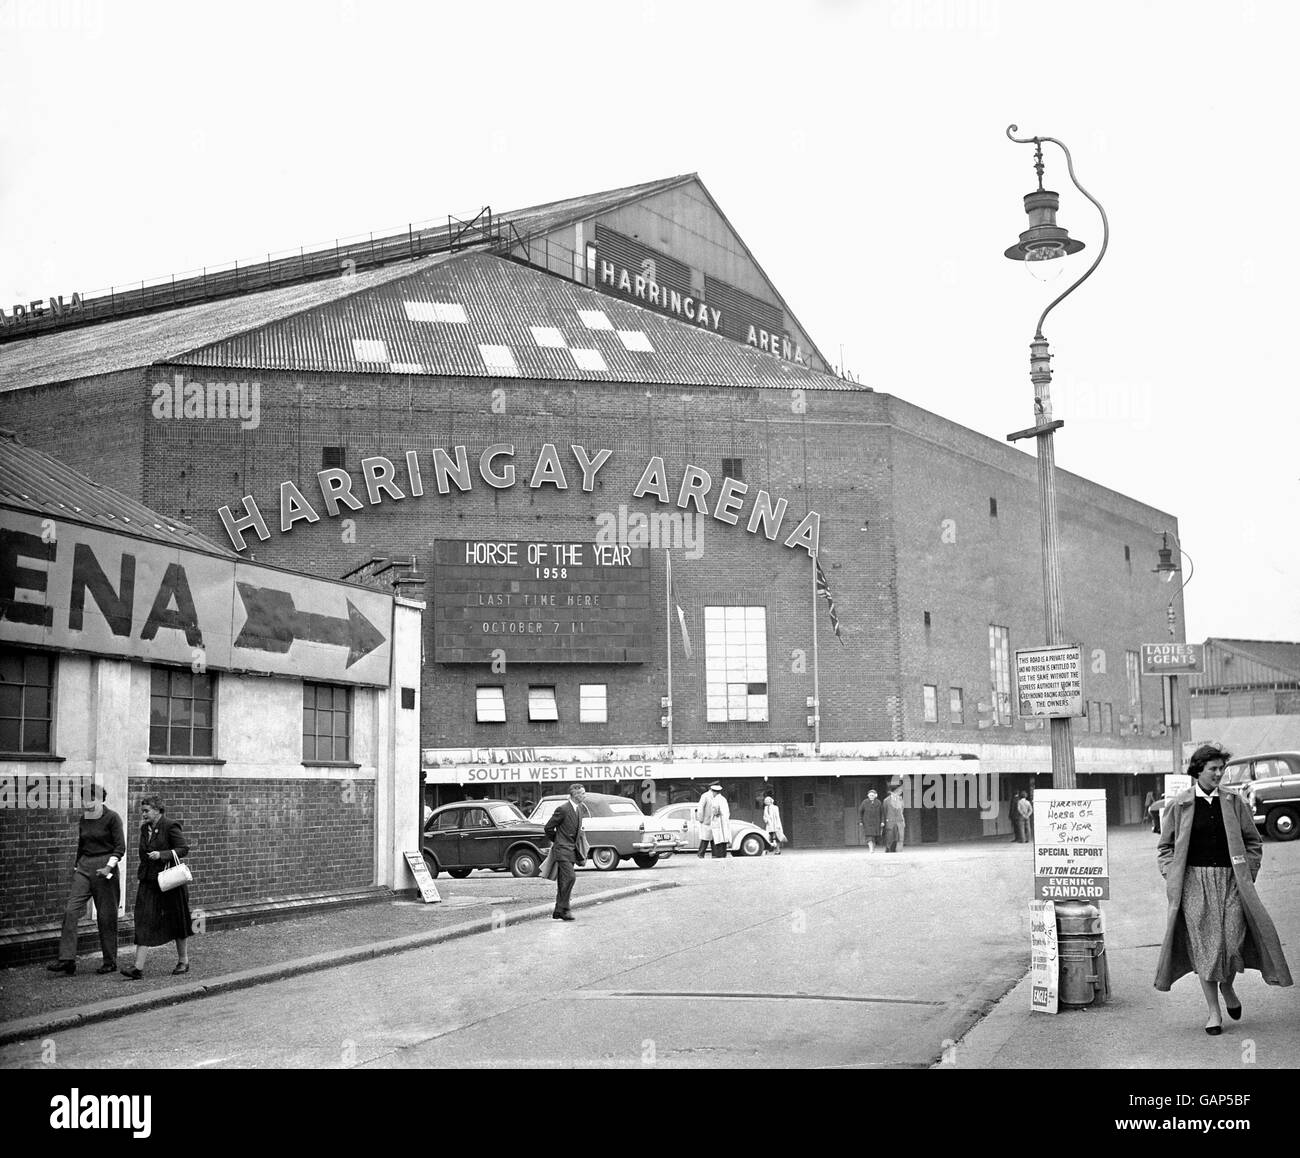 Harringay Arena. An exterior view of Harringay Arena in north London. Stock Photo